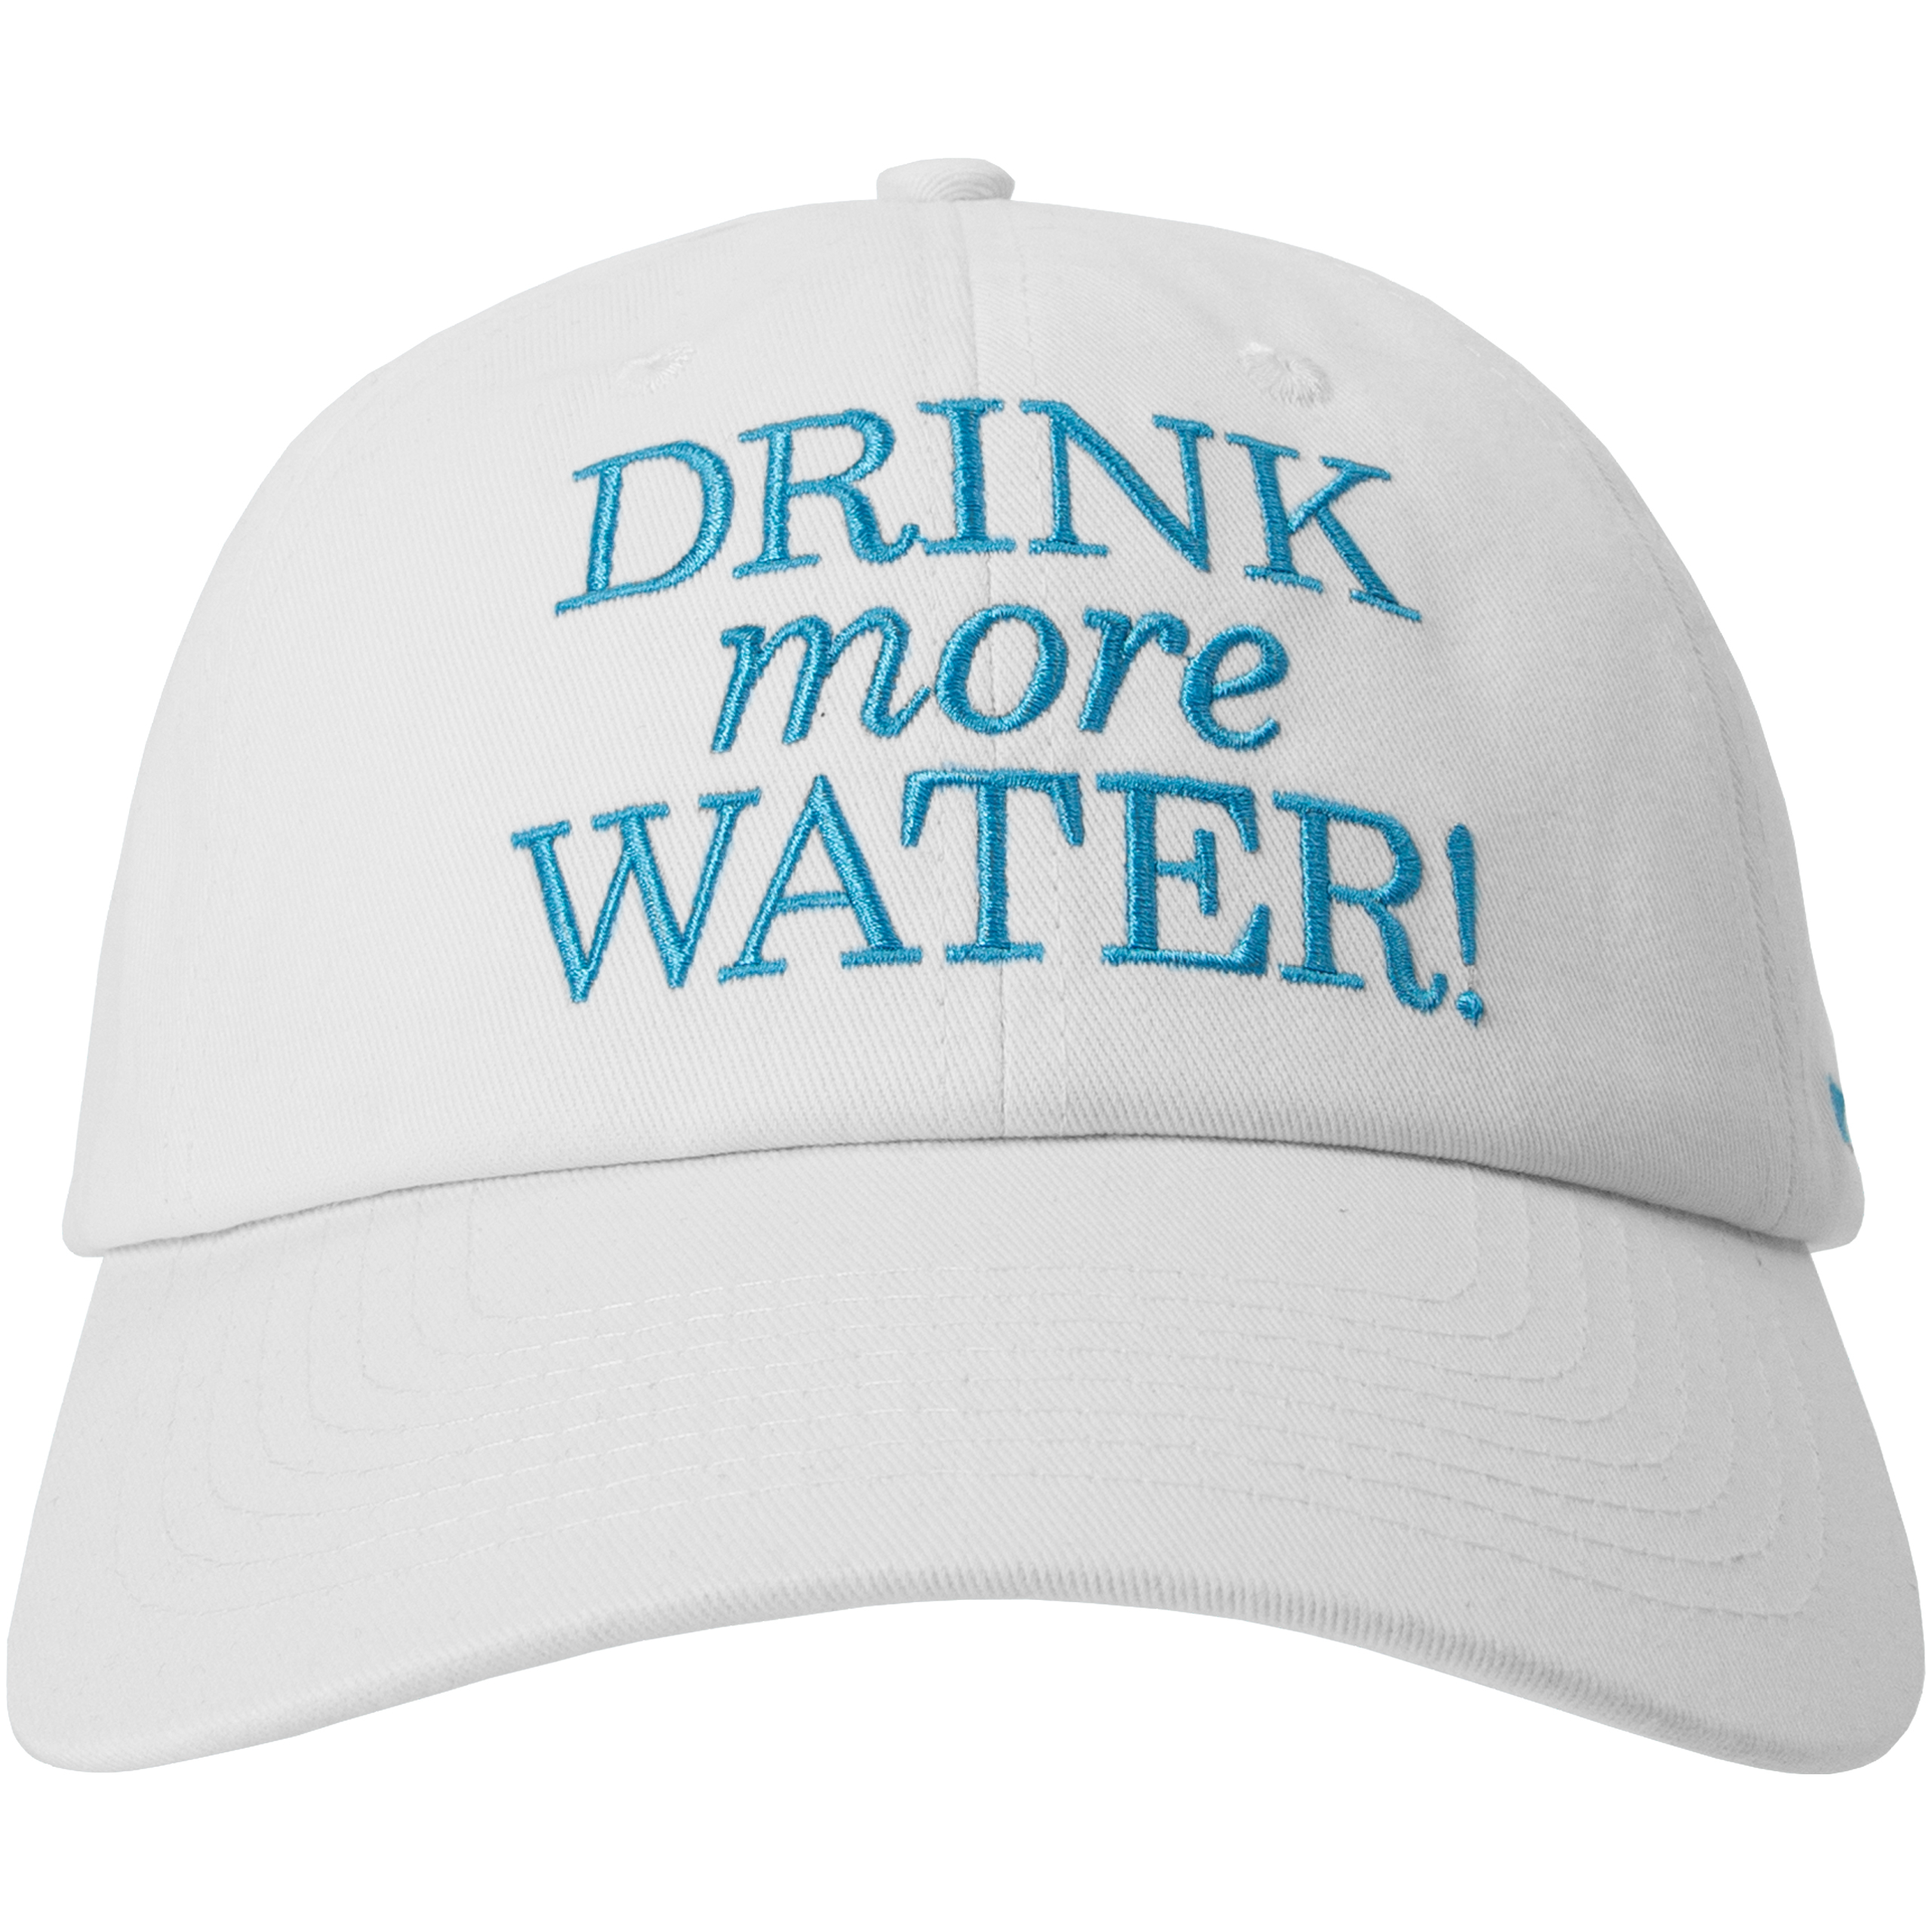 Кепка с вышивкой Drink More Water